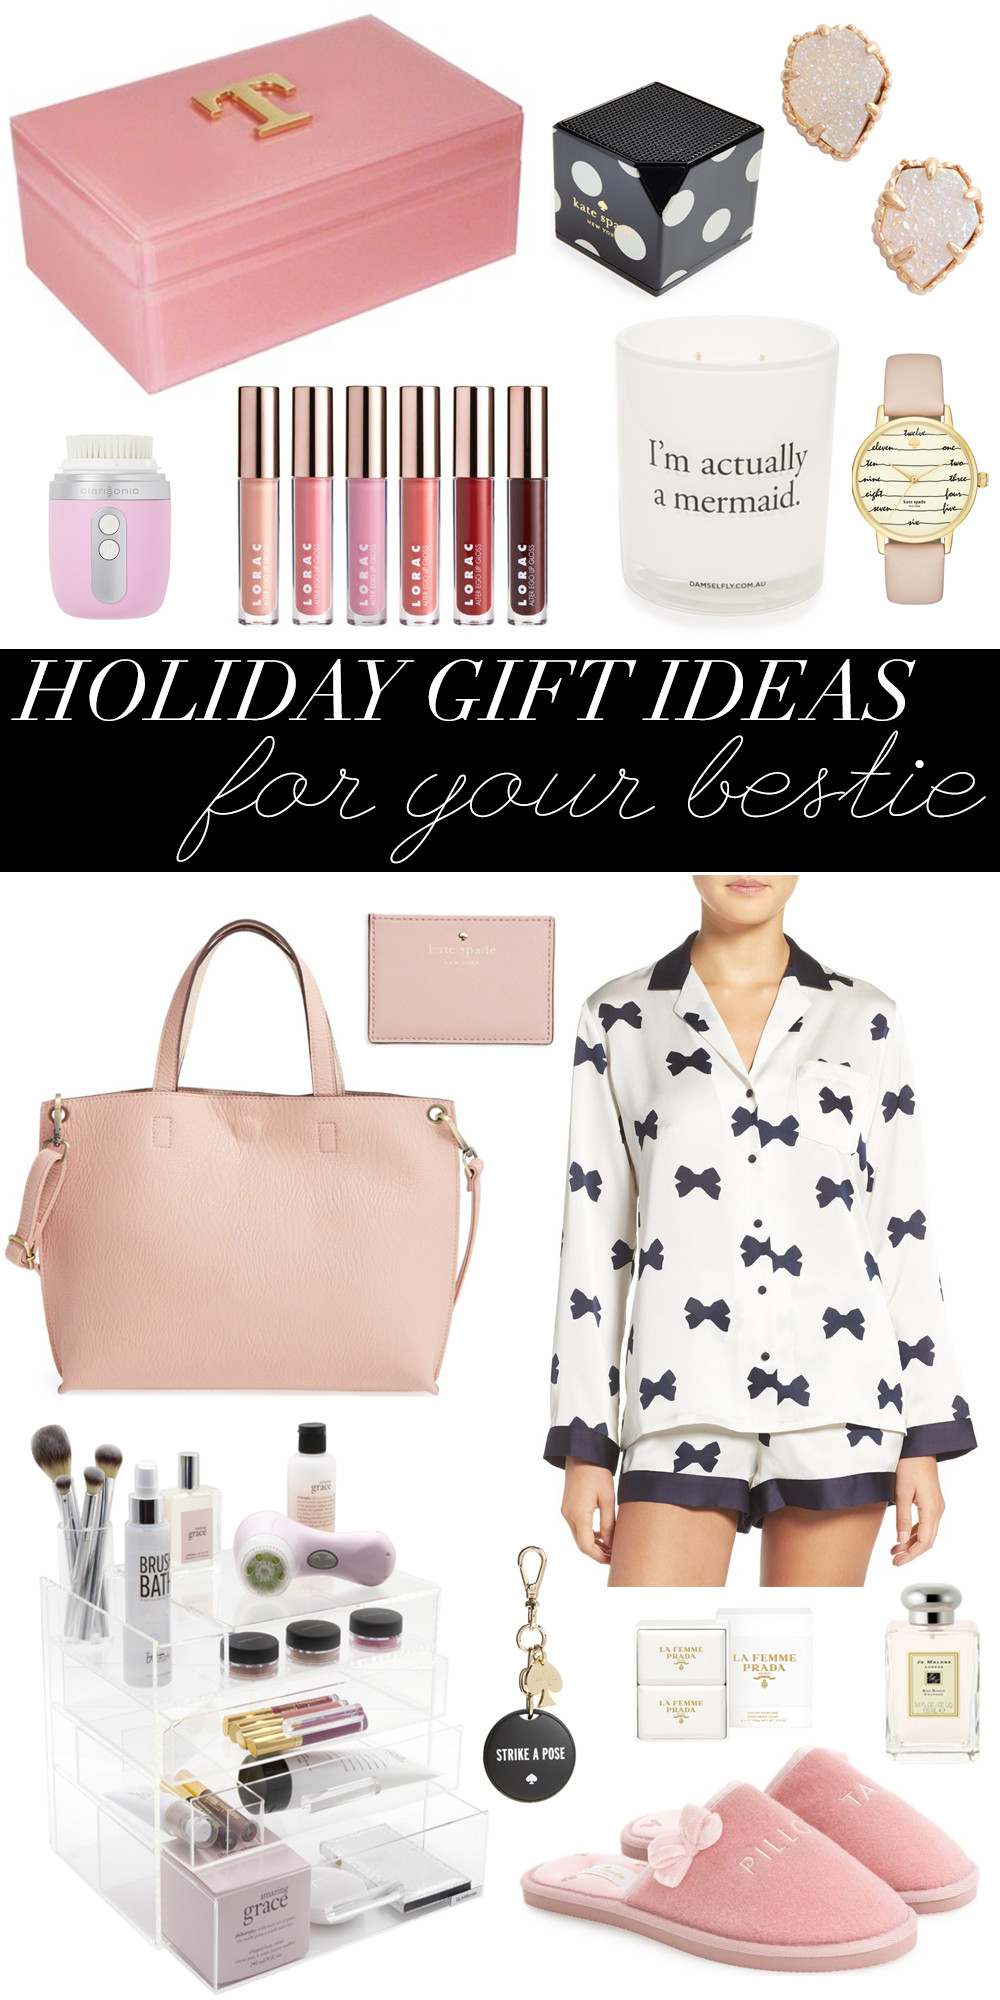 Christmas Gift Ideas For Bff
 Holiday Gift Ideas For Your Best Friend